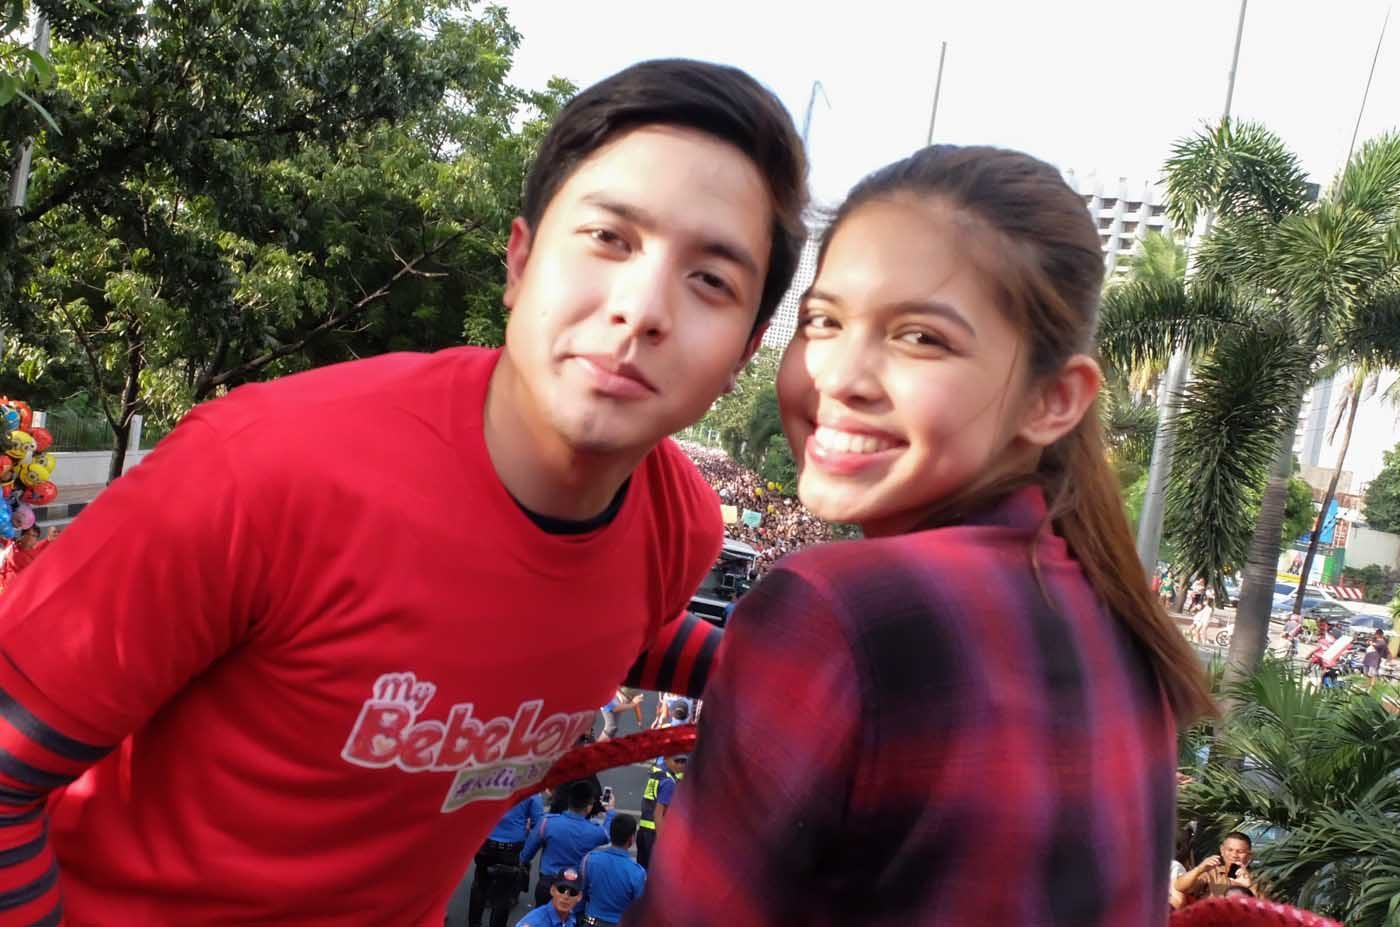 IN PHOTOS: MMFF 2015 Parade of Stars with AlDub, JaDine, KimXi, Kris, and more